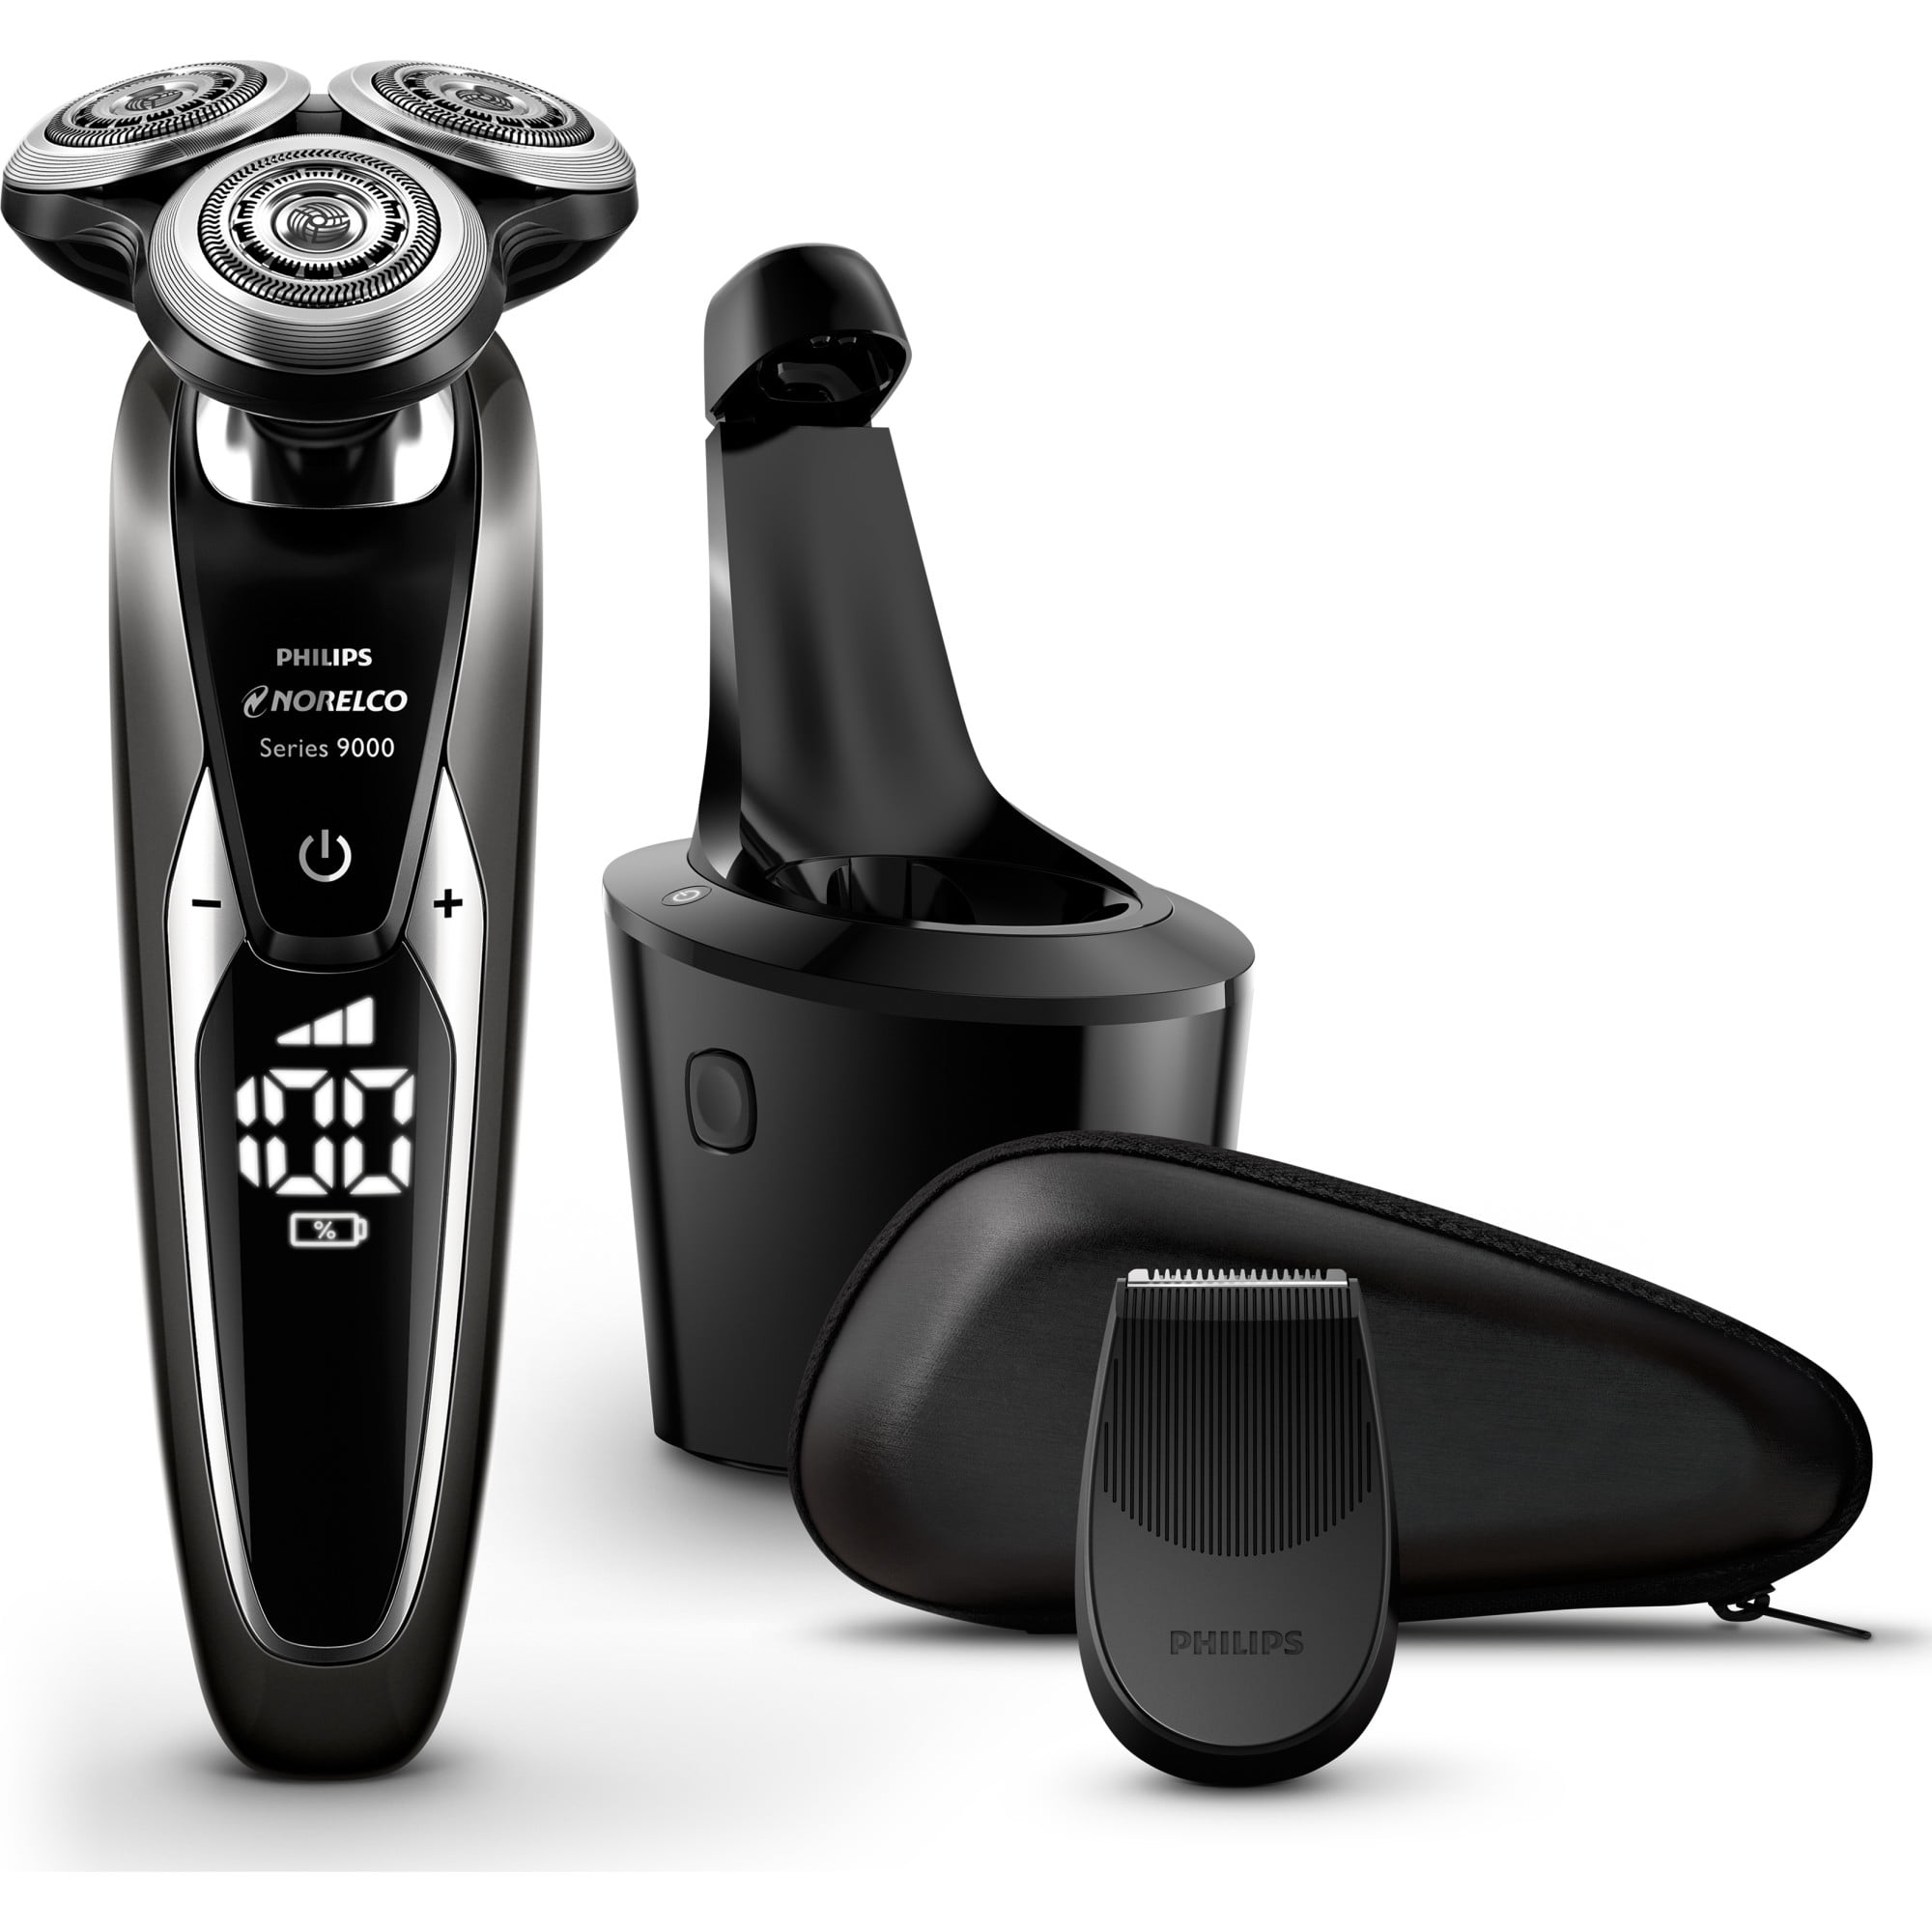 Philips Norelco 9700 Rechargeable Wetdry Electric Shaver S972184